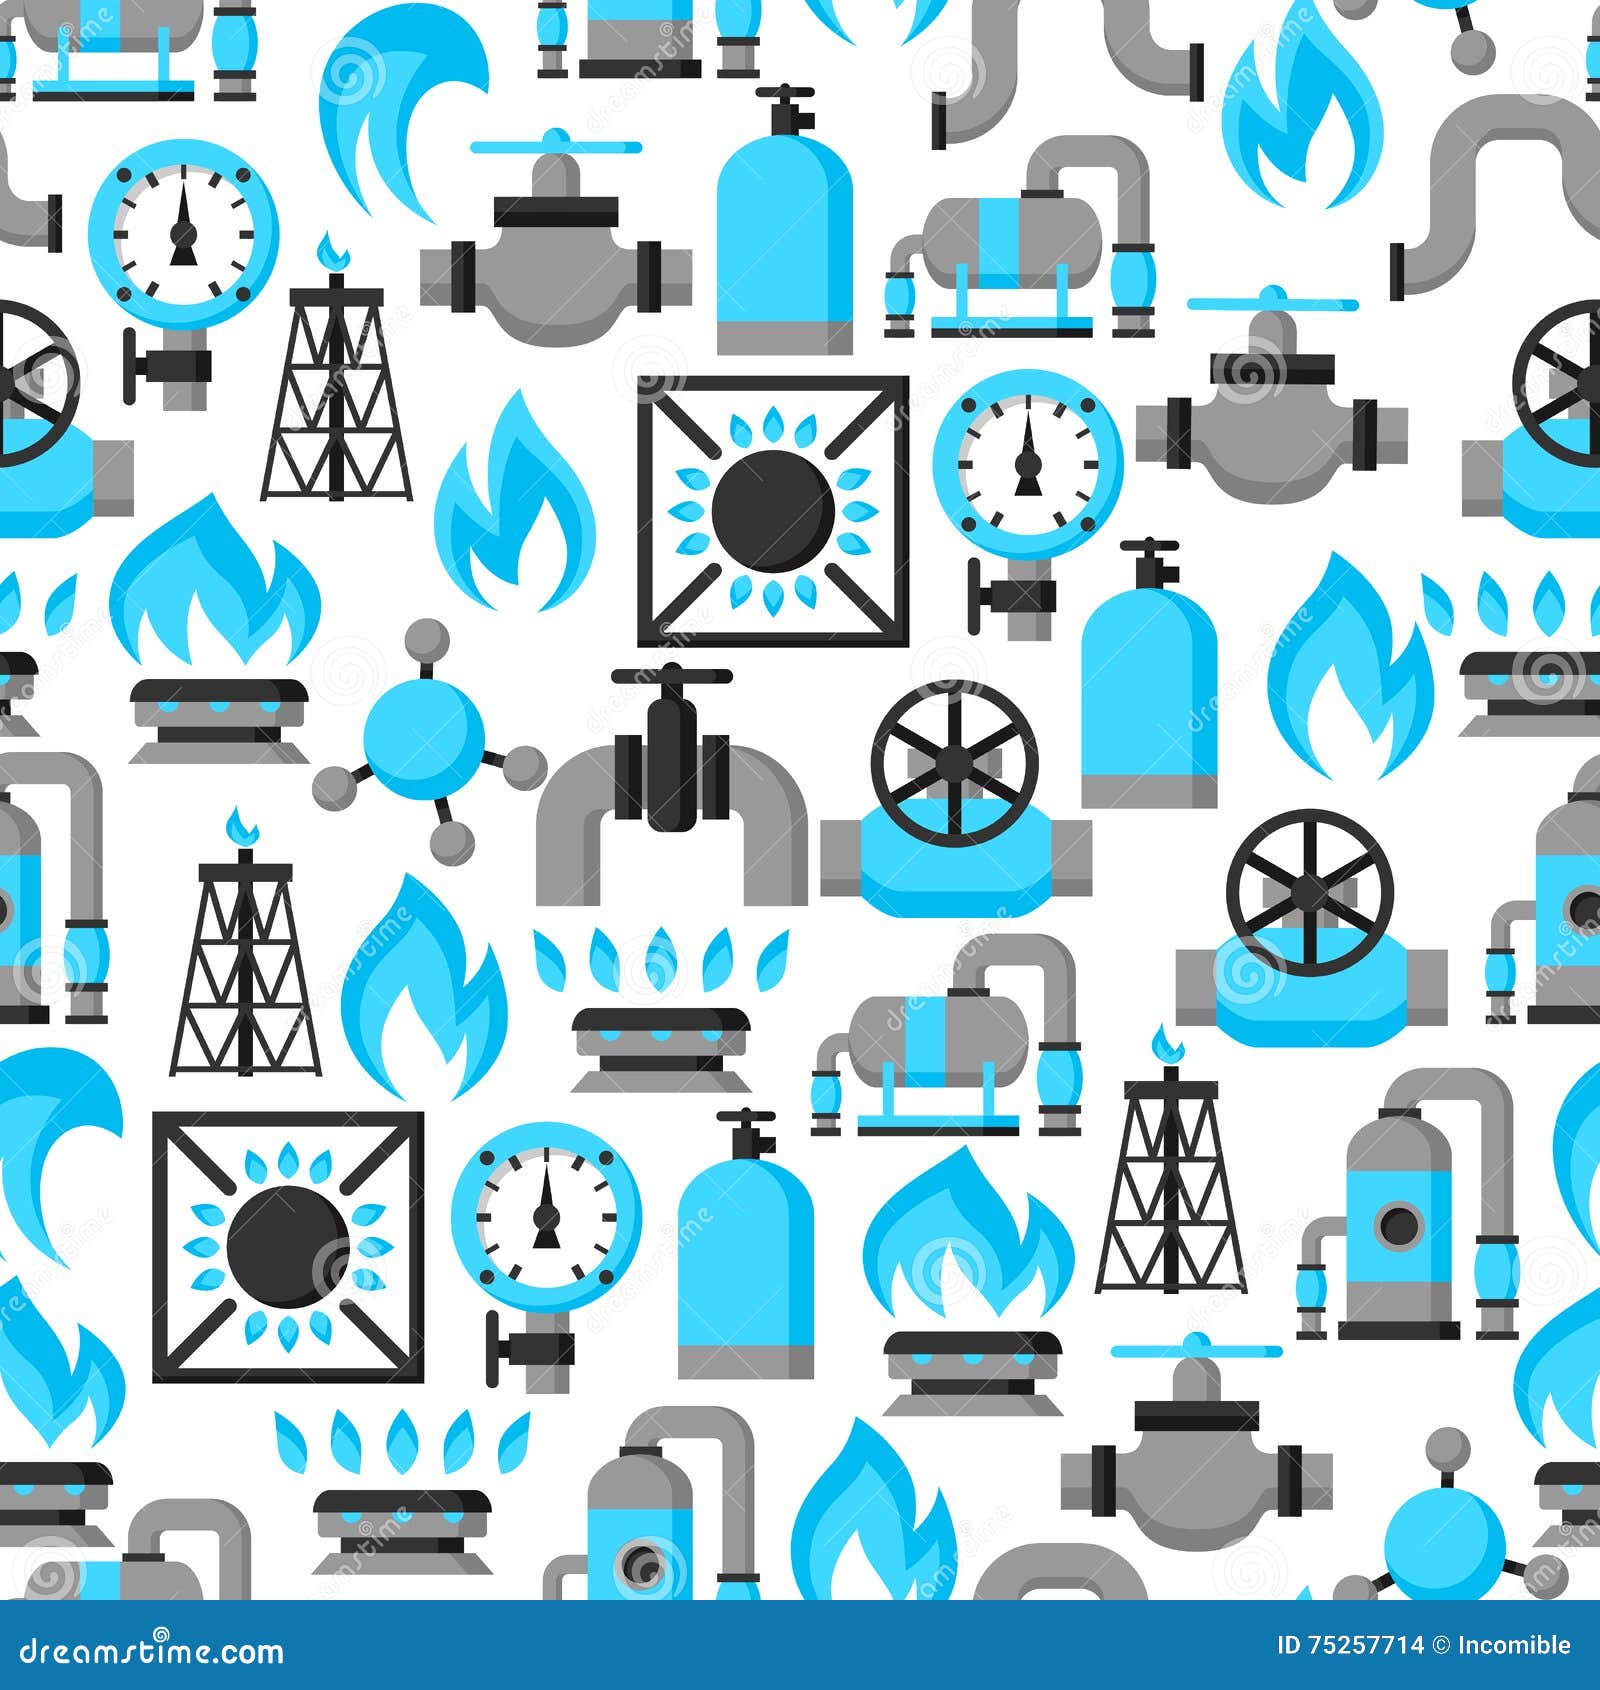 natural gas production, injection and storage. industrial seamless pattern